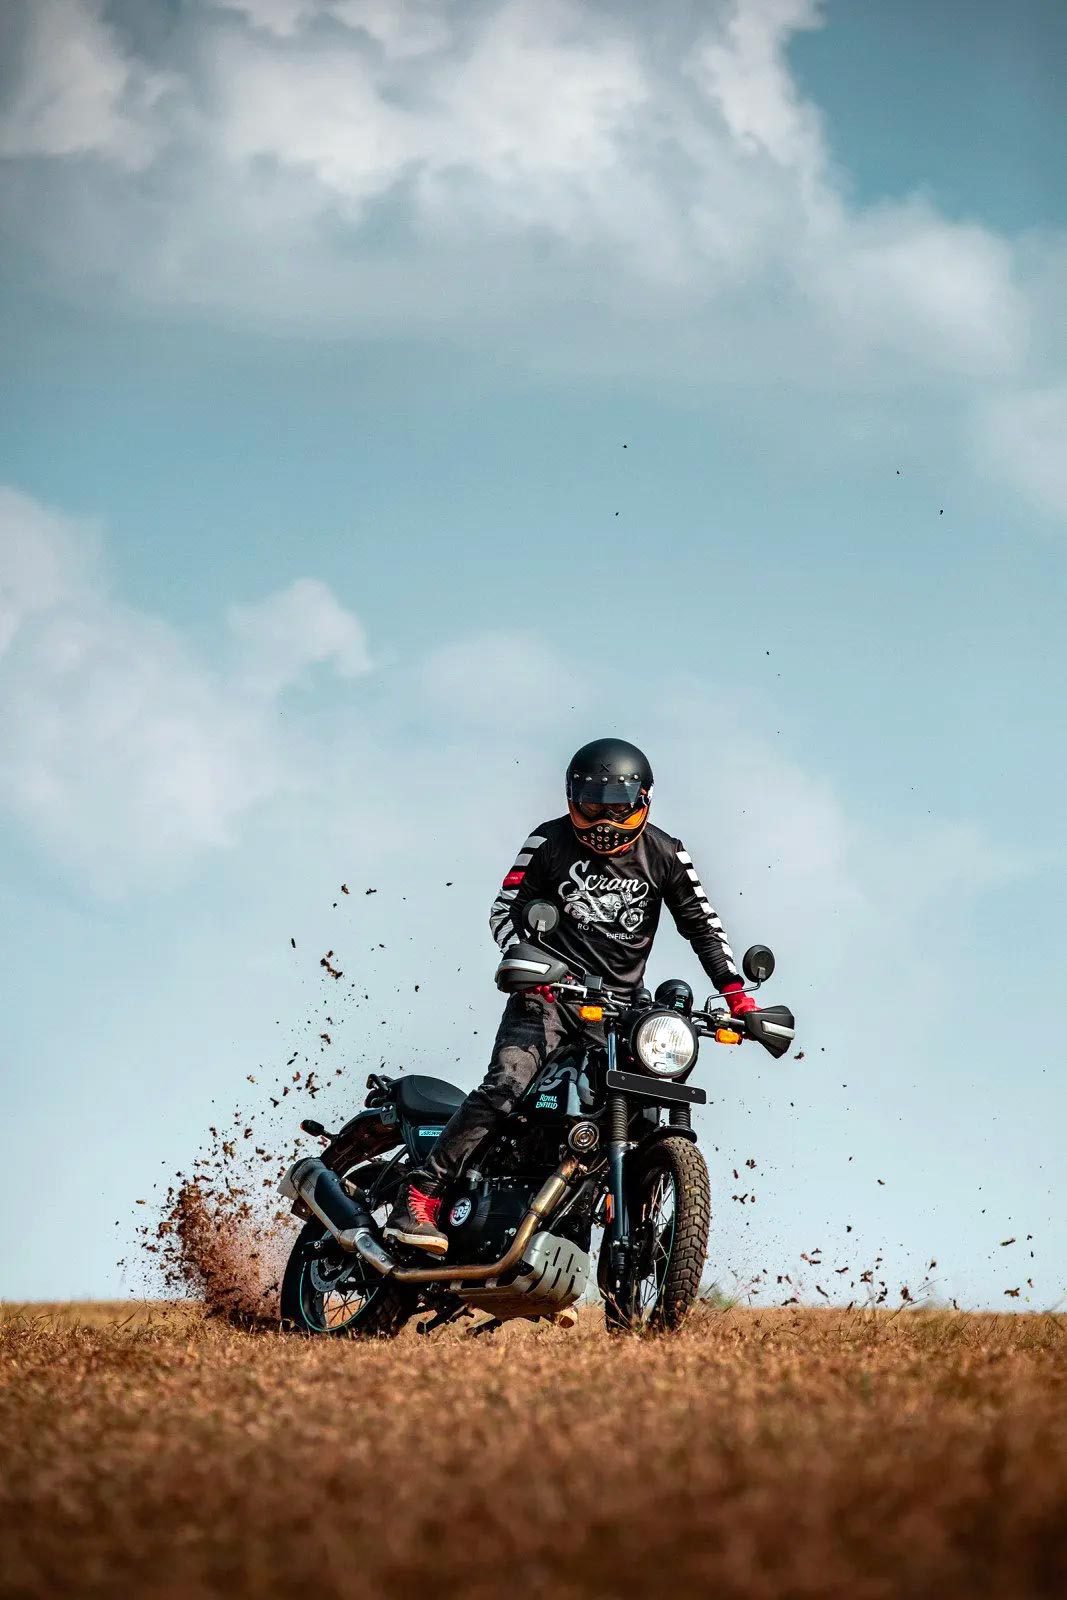 A 2022 Royal Enfield Scram 411 motorcycle kicks up some dirt in a field